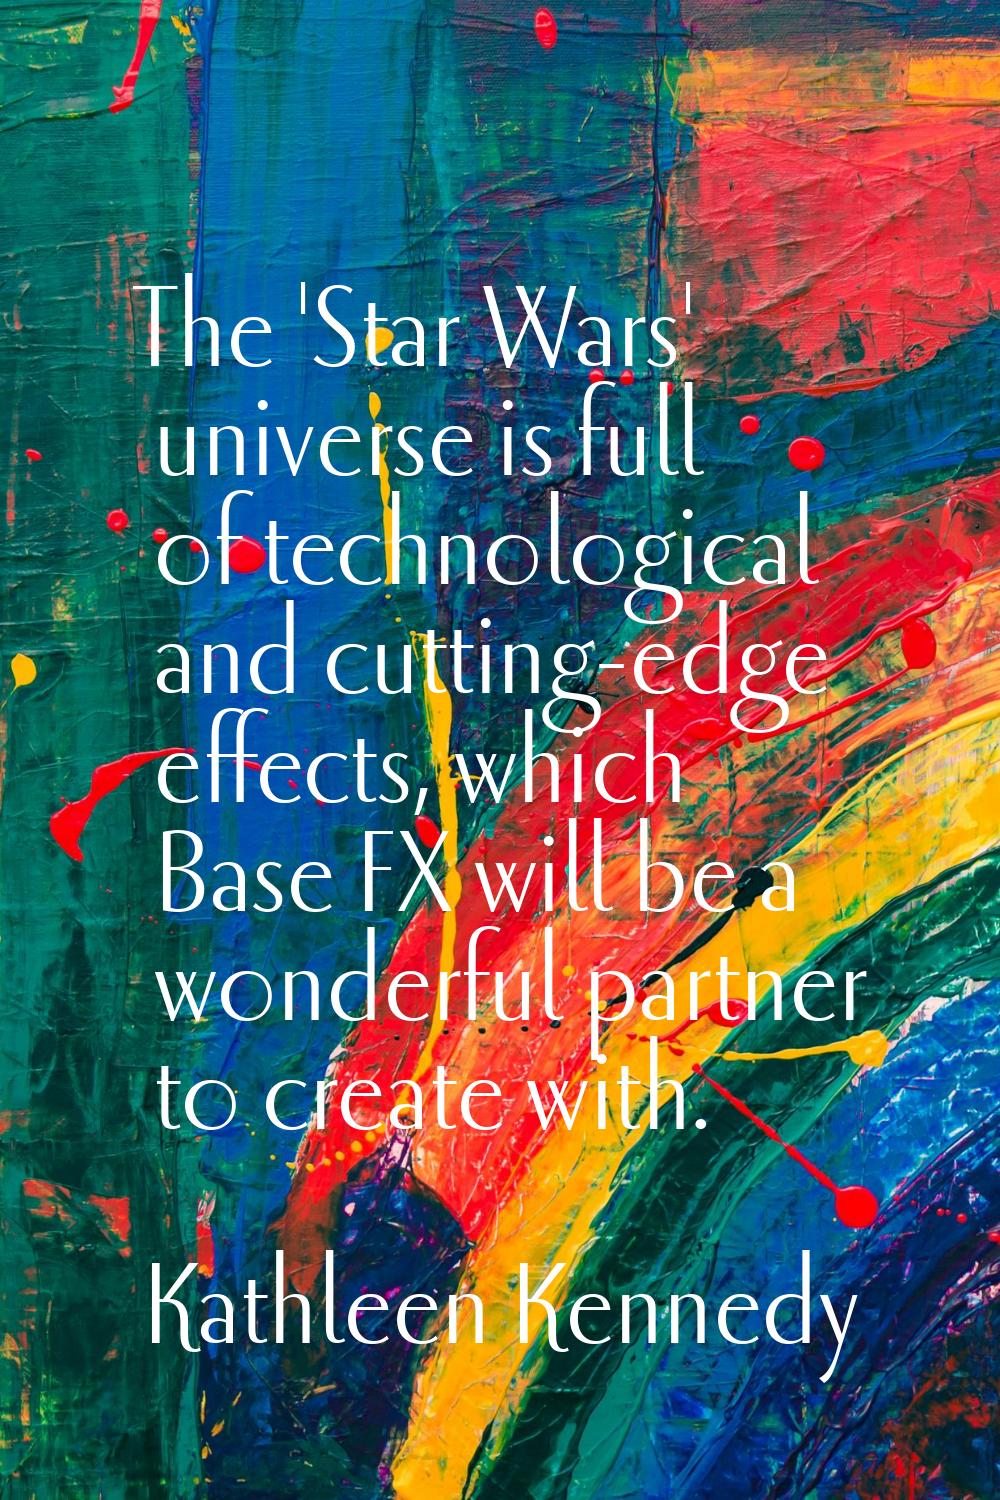 The 'Star Wars' universe is full of technological and cutting-edge effects, which Base FX will be a